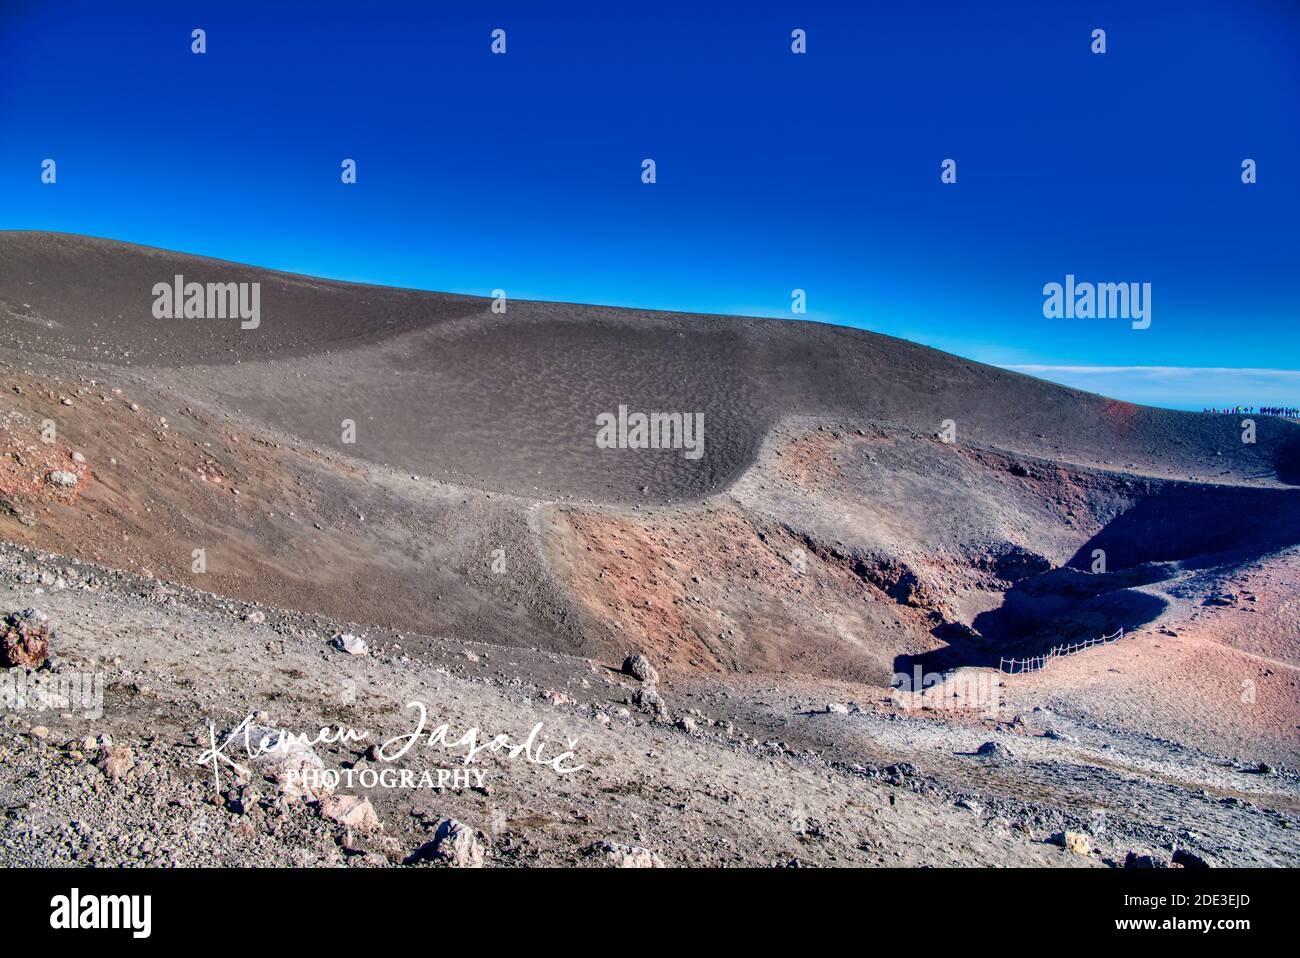 Mount Etna with blue blue sky Stock Photo